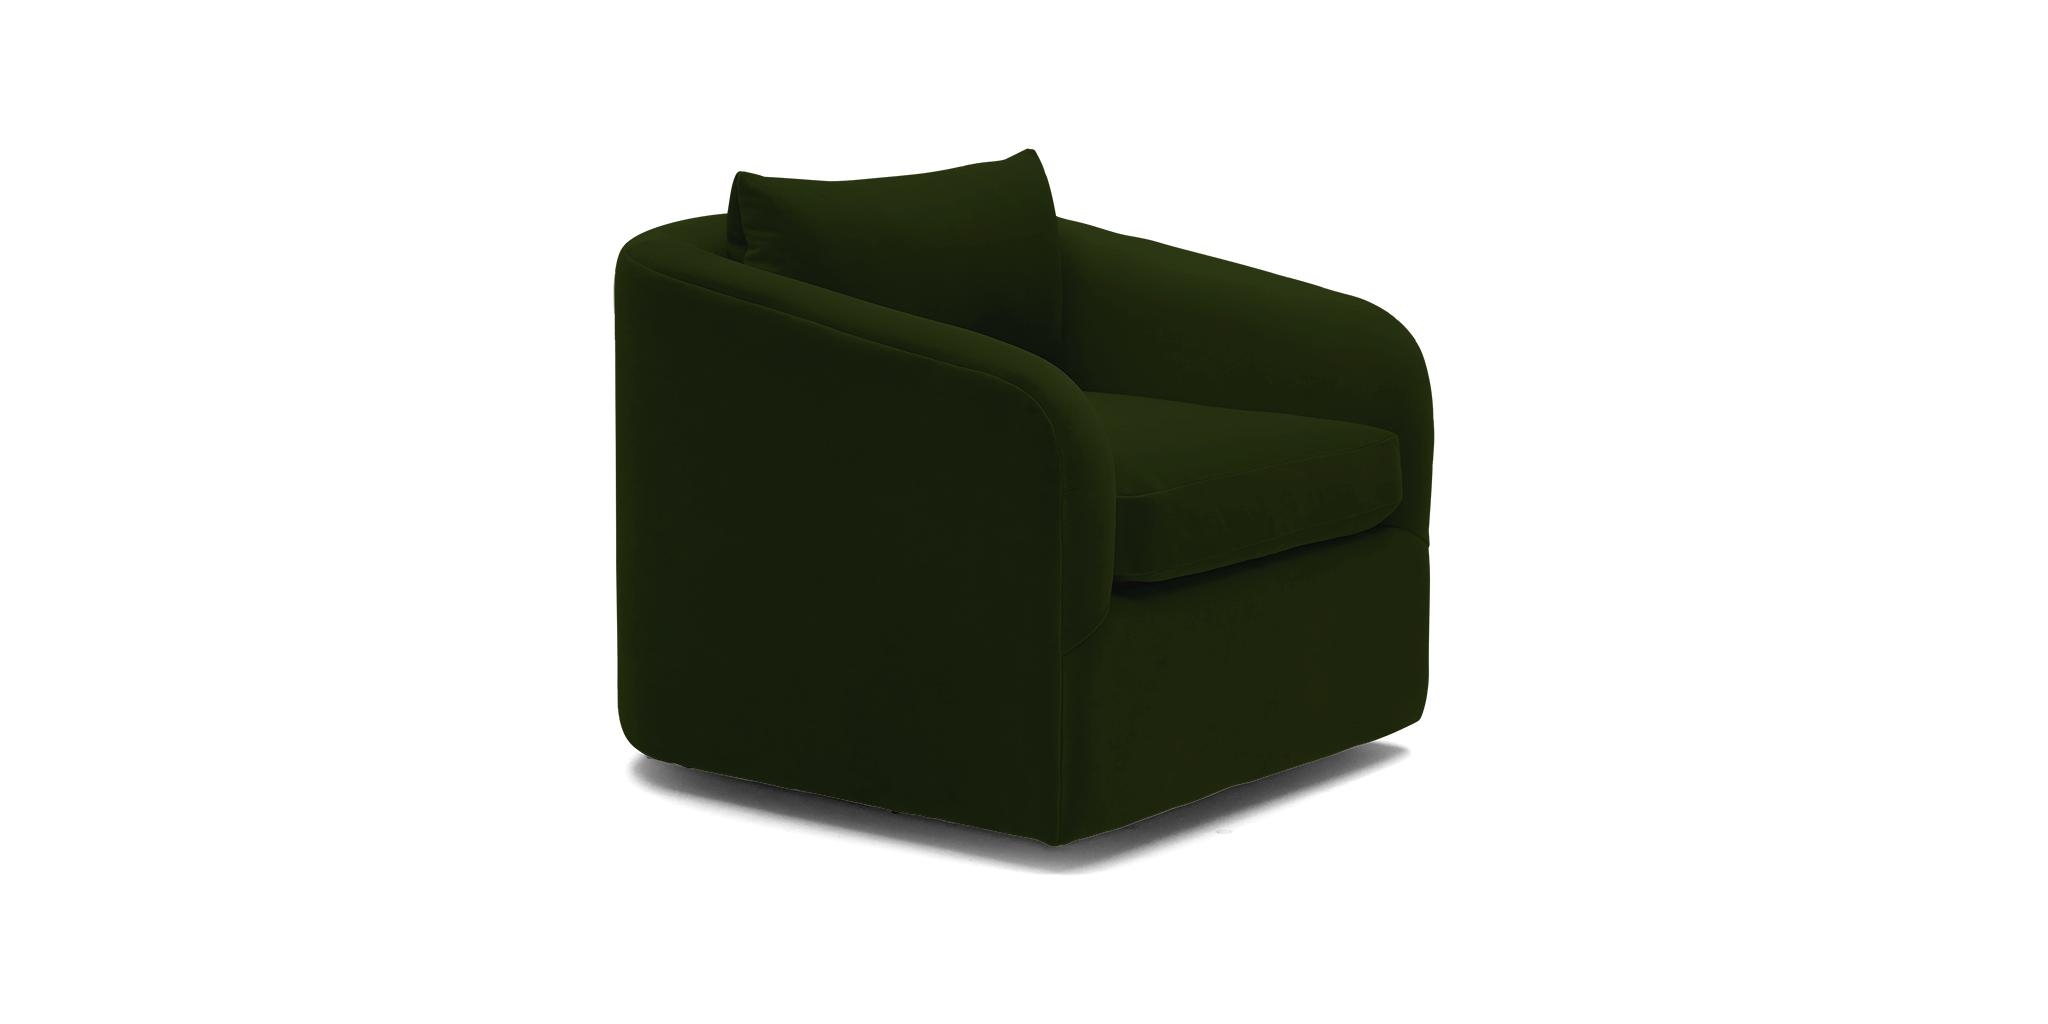 Green Amelia Mid Century Modern Swivel Chair - Royale Forest - Image 1